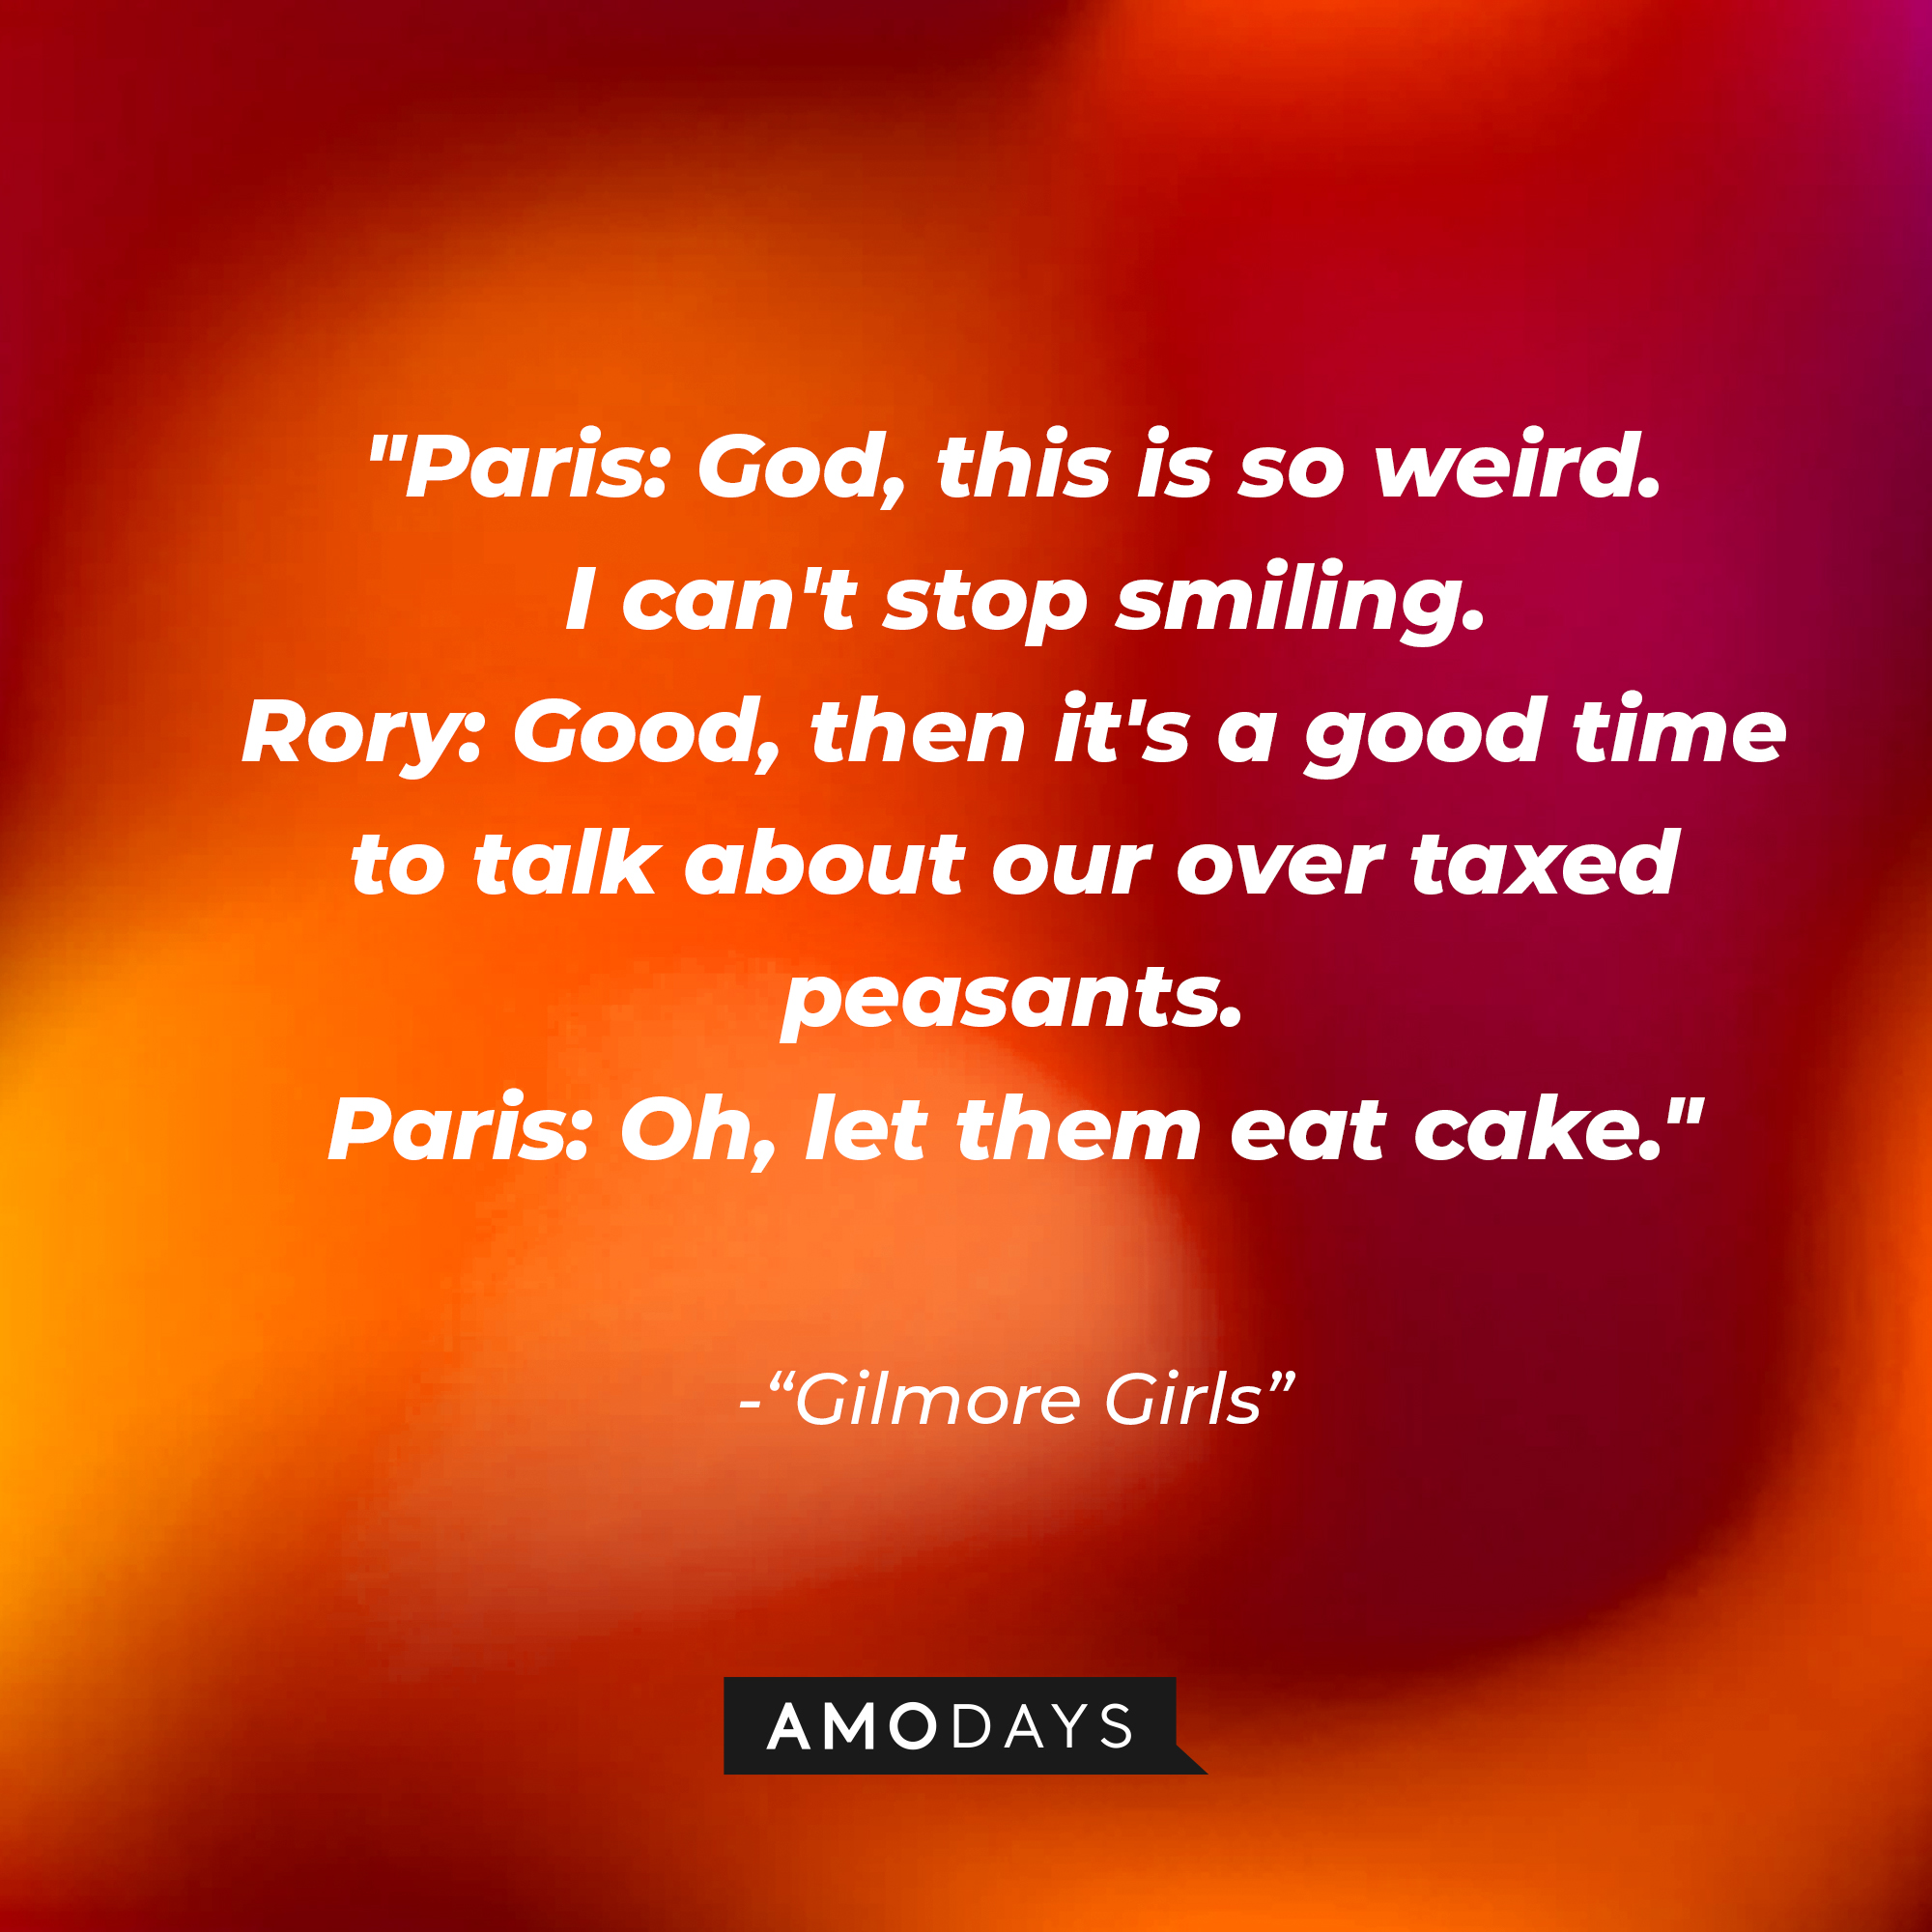 Quote from "Gilmore Girls": “Paris: God, this is so weird. I can't stop smiling. Rory: Good, then it's a good time to talk about our over taxed peasants. Paris: Oh, let them eat cake.” | Source: AmoDays